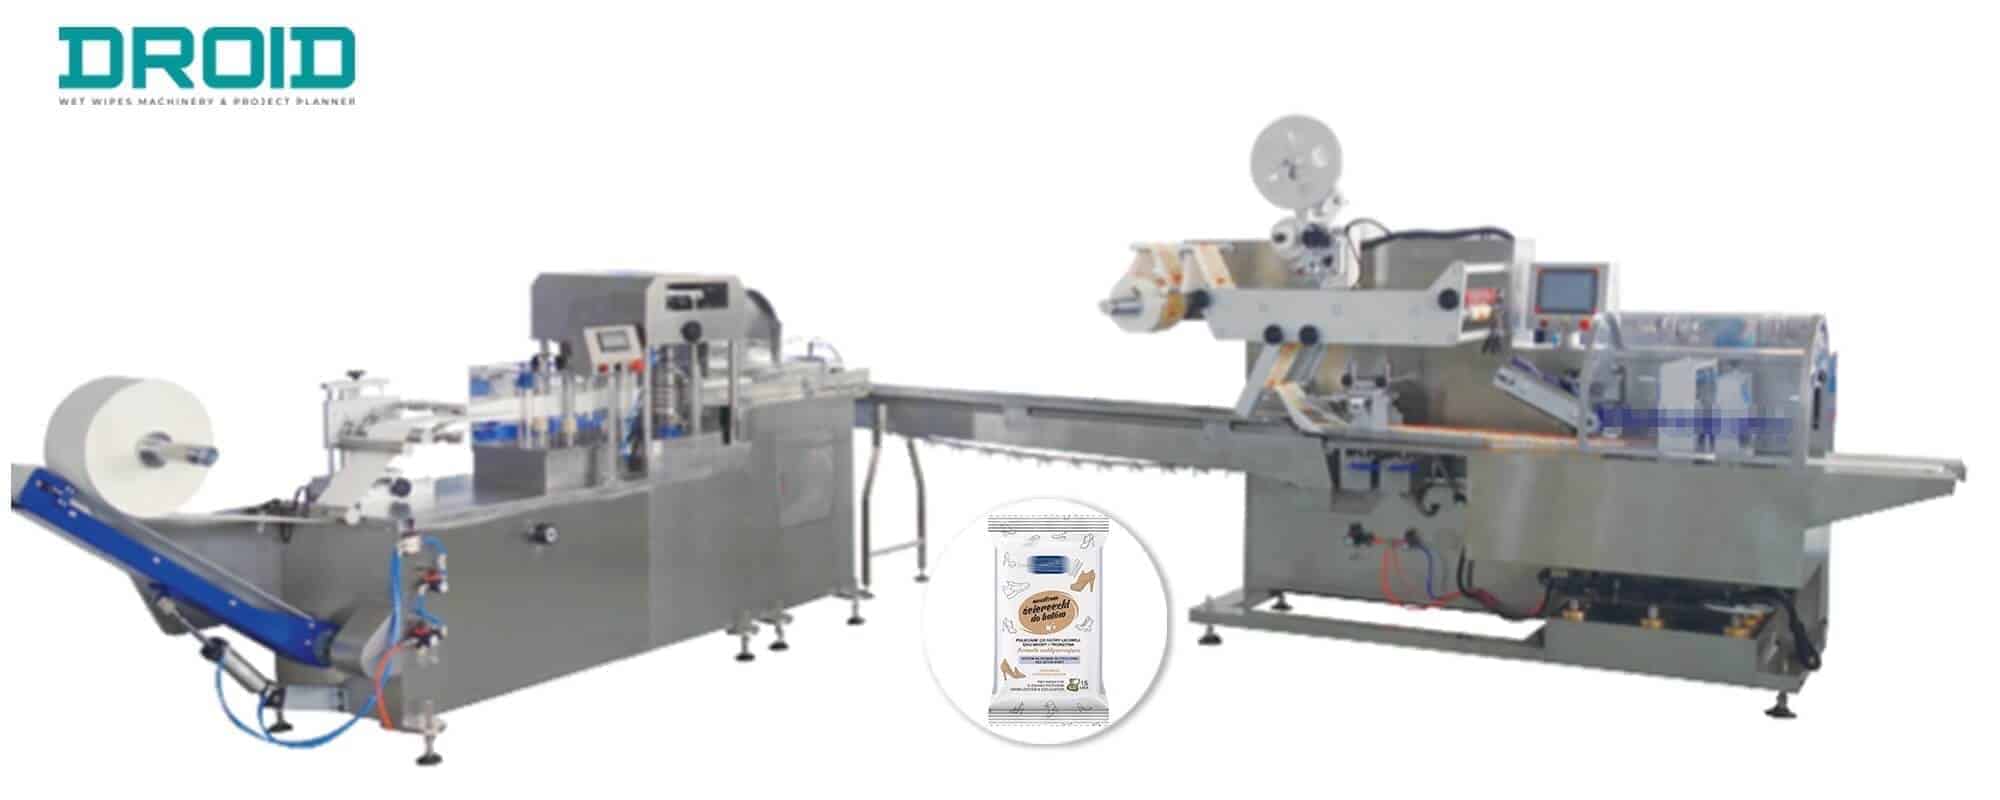 wet wipes machine 1 - Are you looking for Disinfectant Wipes Making Machines?